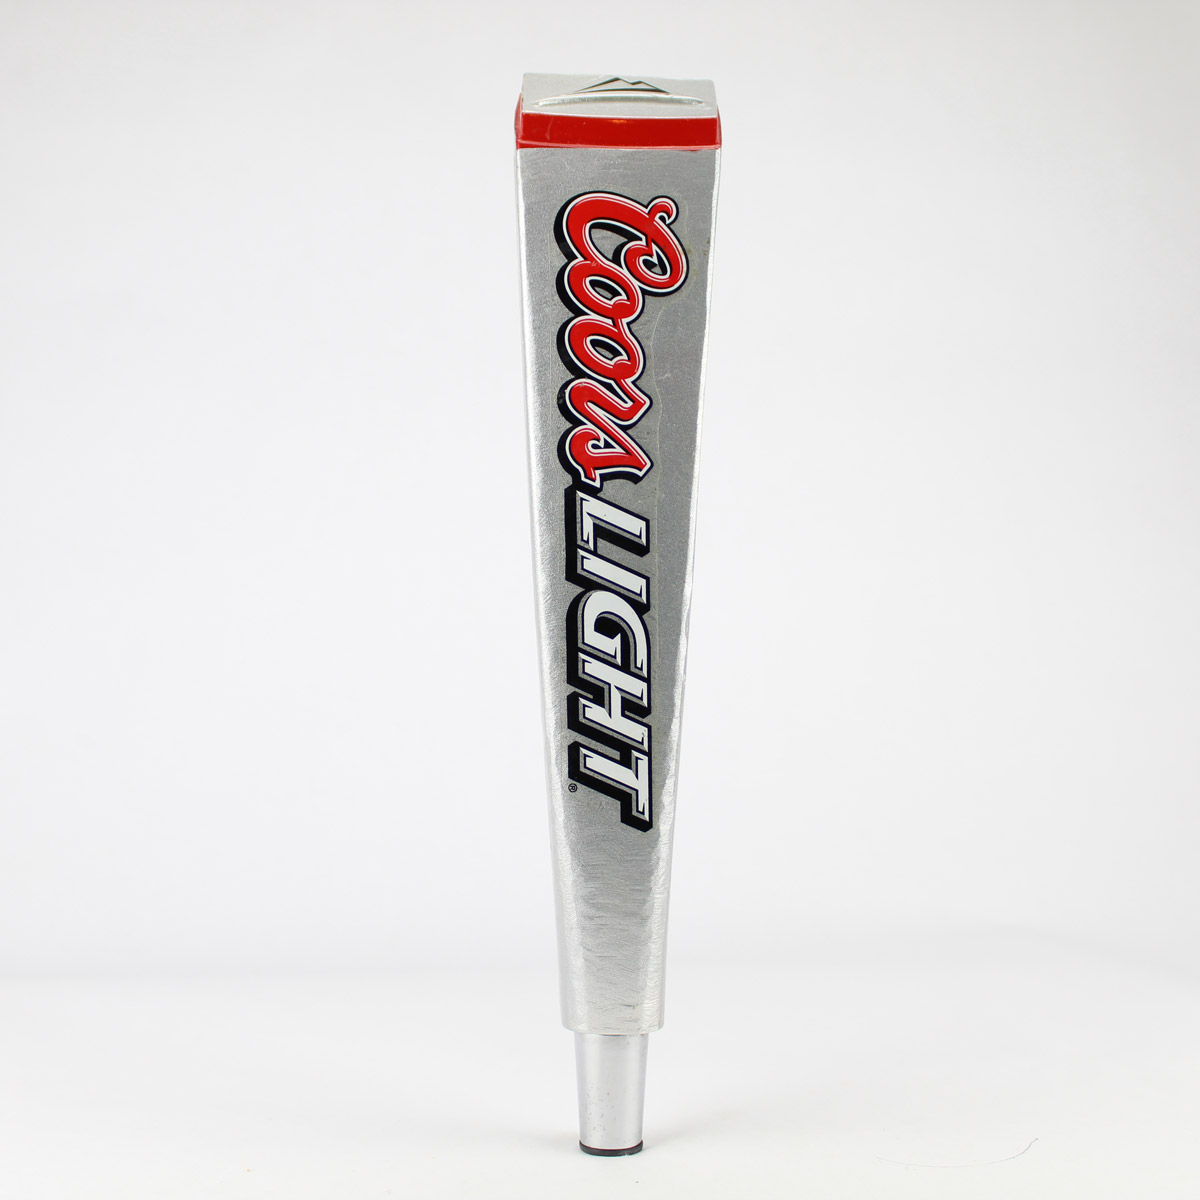 #TK284 COORS LIGHT REPLACEMENT TAP pub,font,tbar,mancave beer 